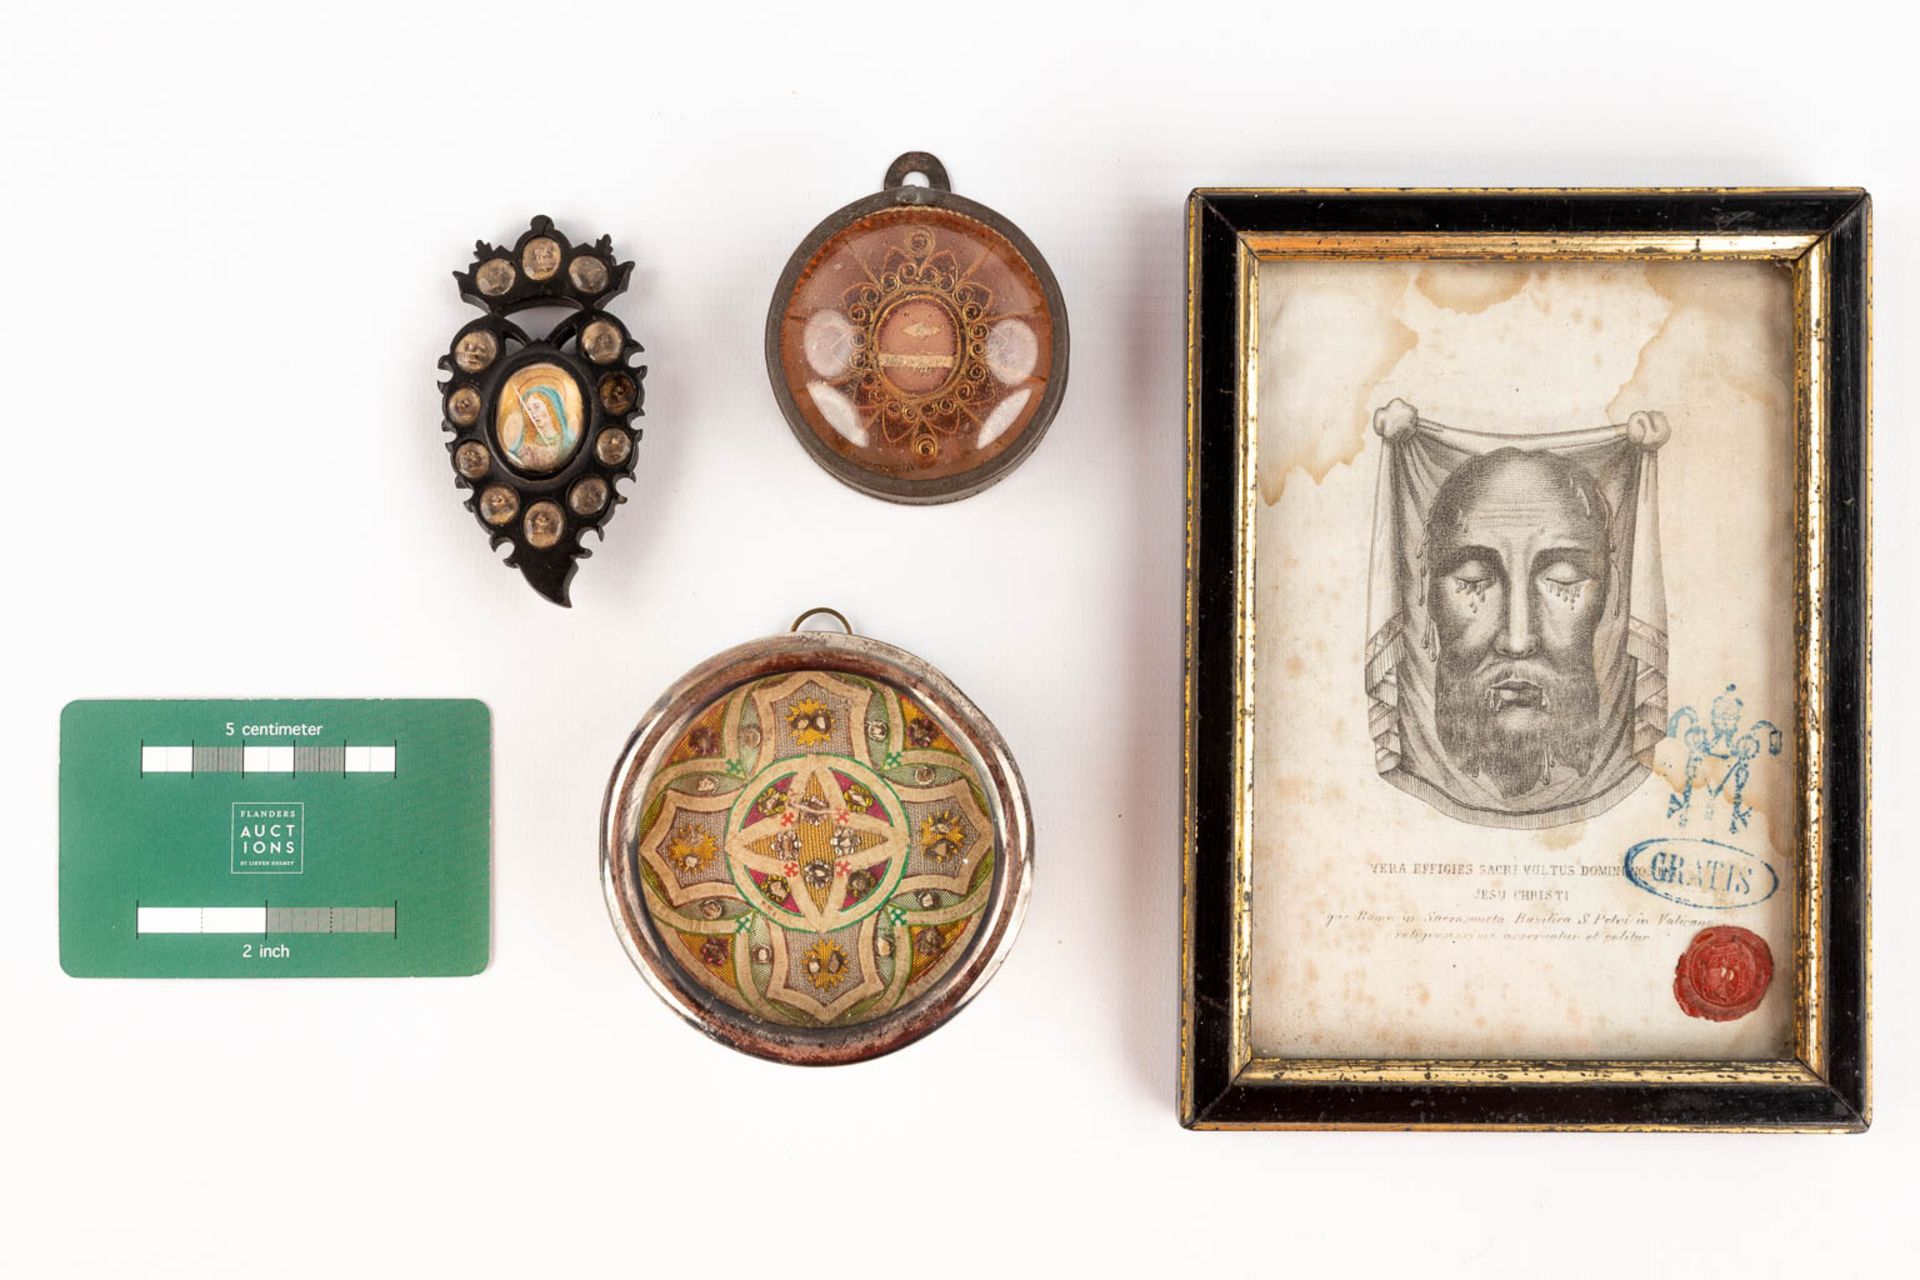 A small collection of relics and reliquary items, The Veil of Veronica, a relic in the shape of a sa - Bild 2 aus 11